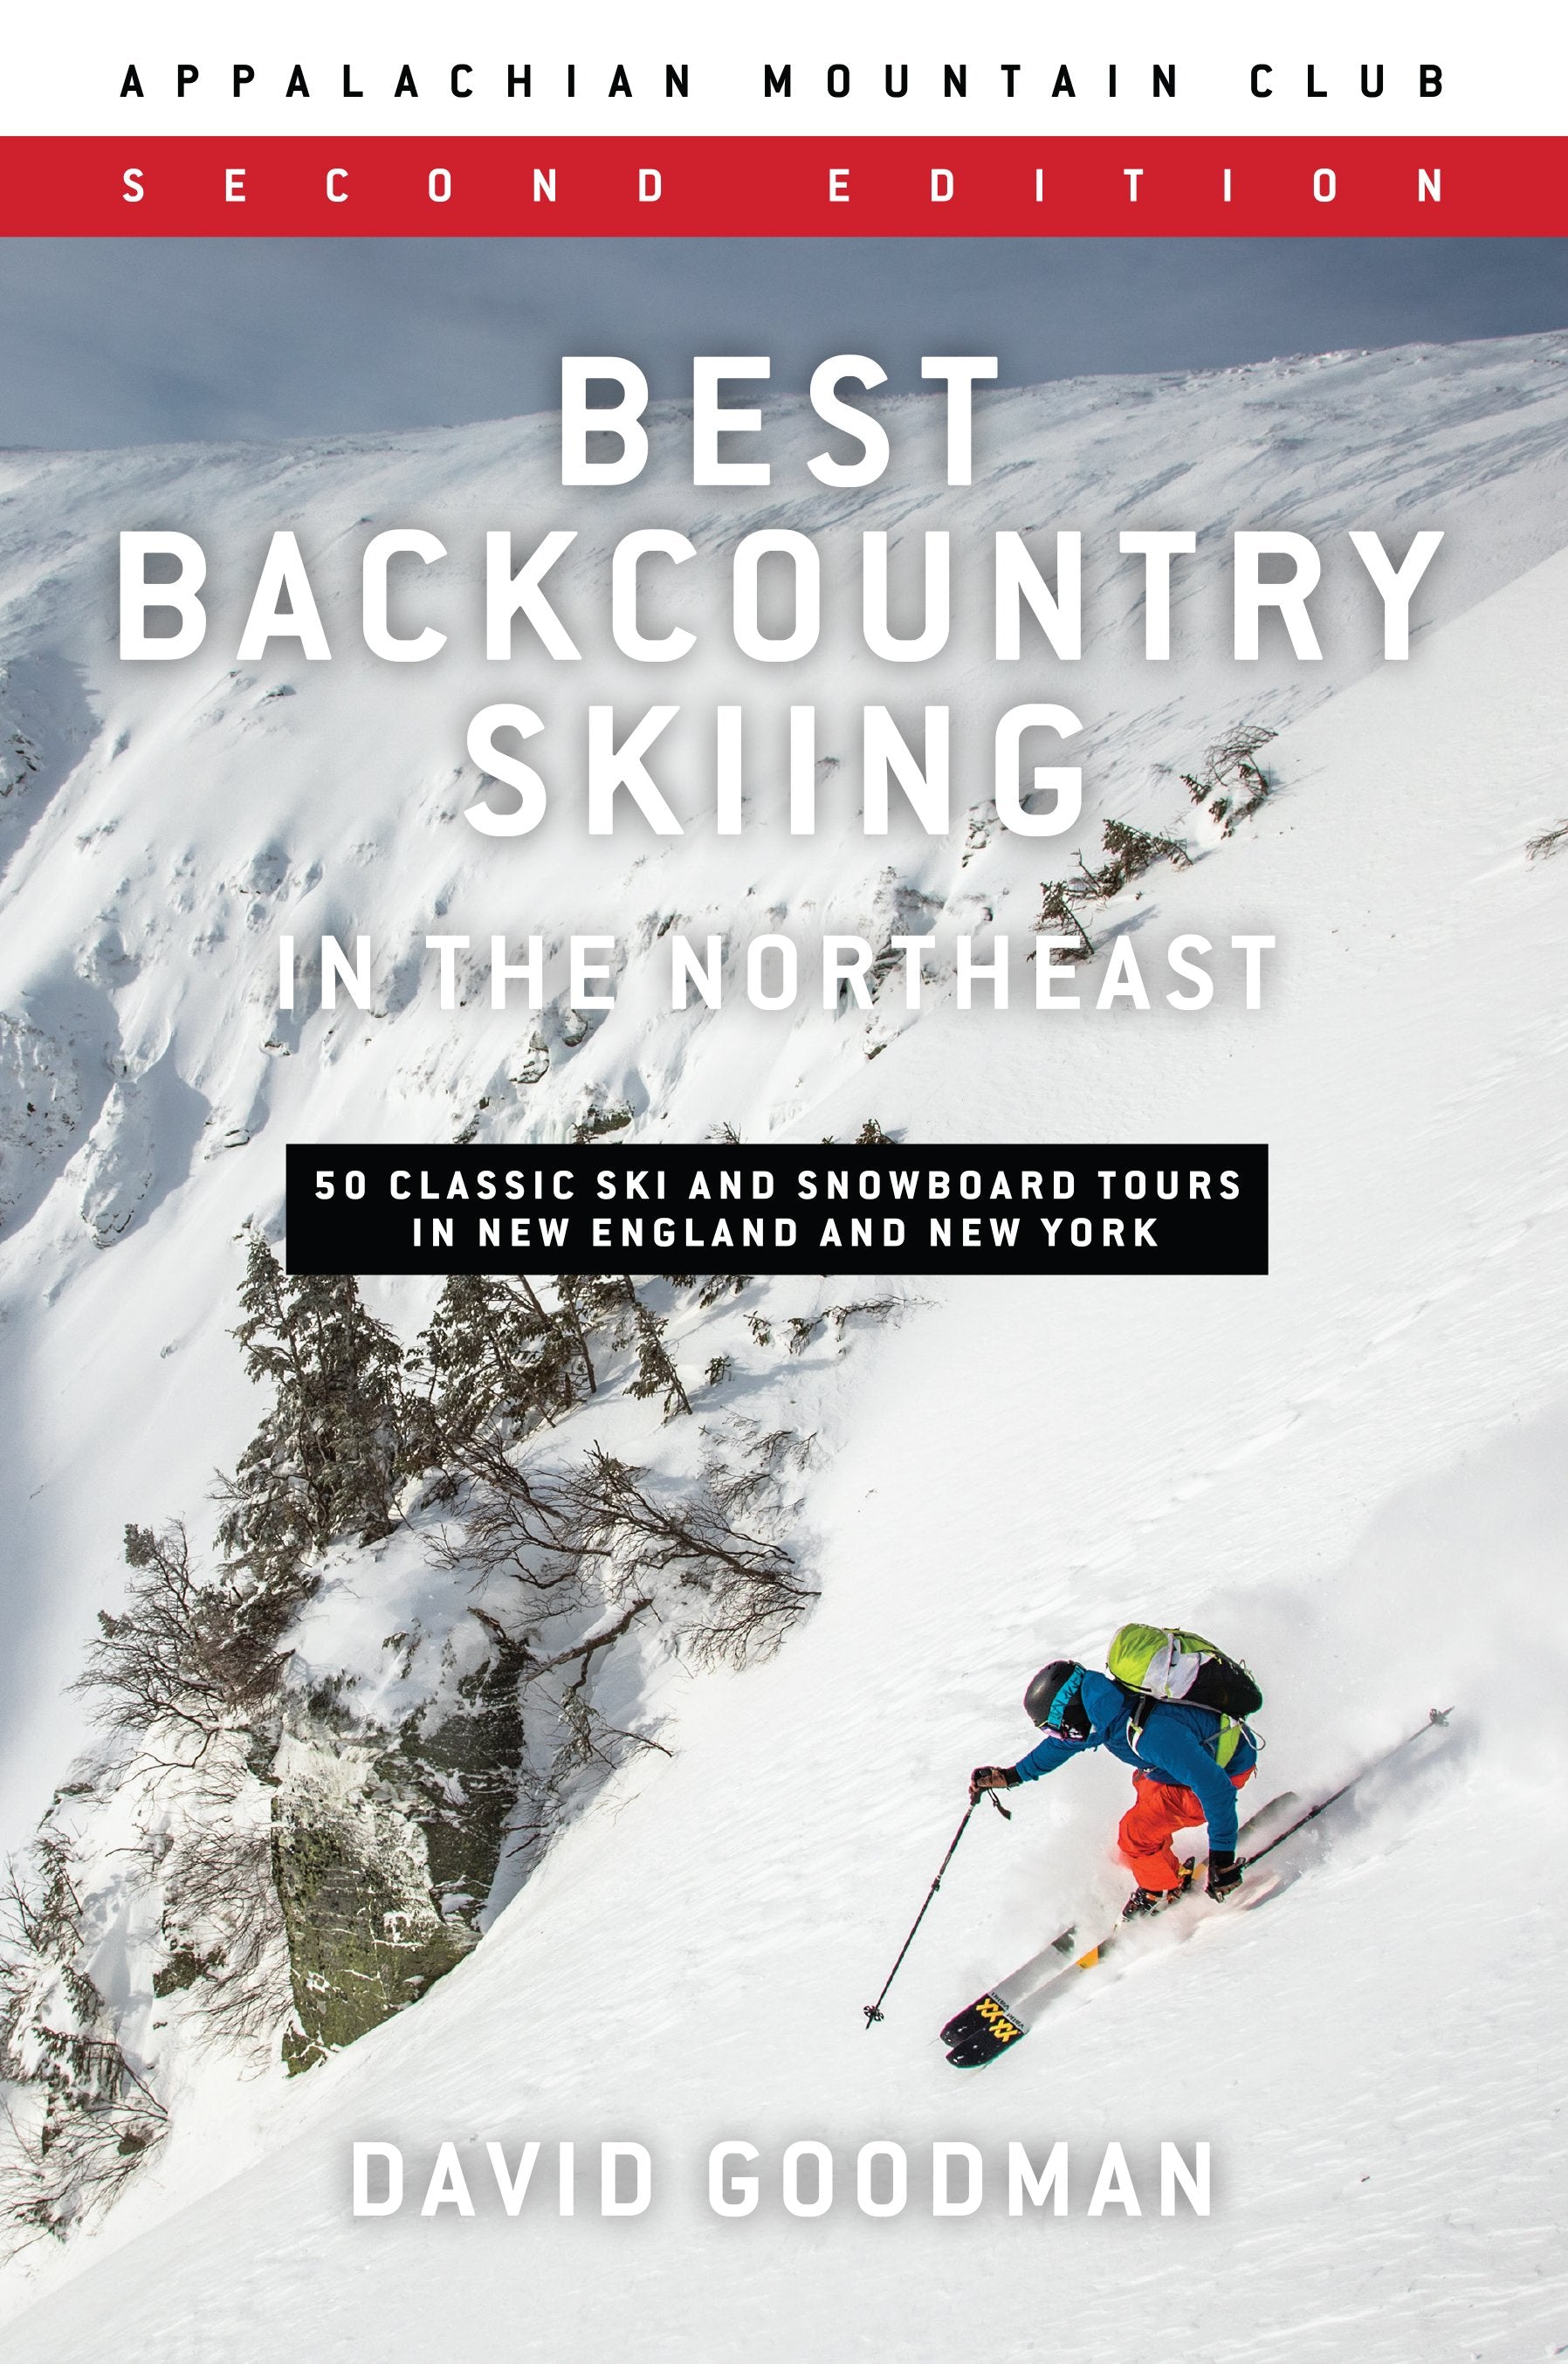 Best Backcountry Skiing in the Northeast, 2nd ed. Goodman